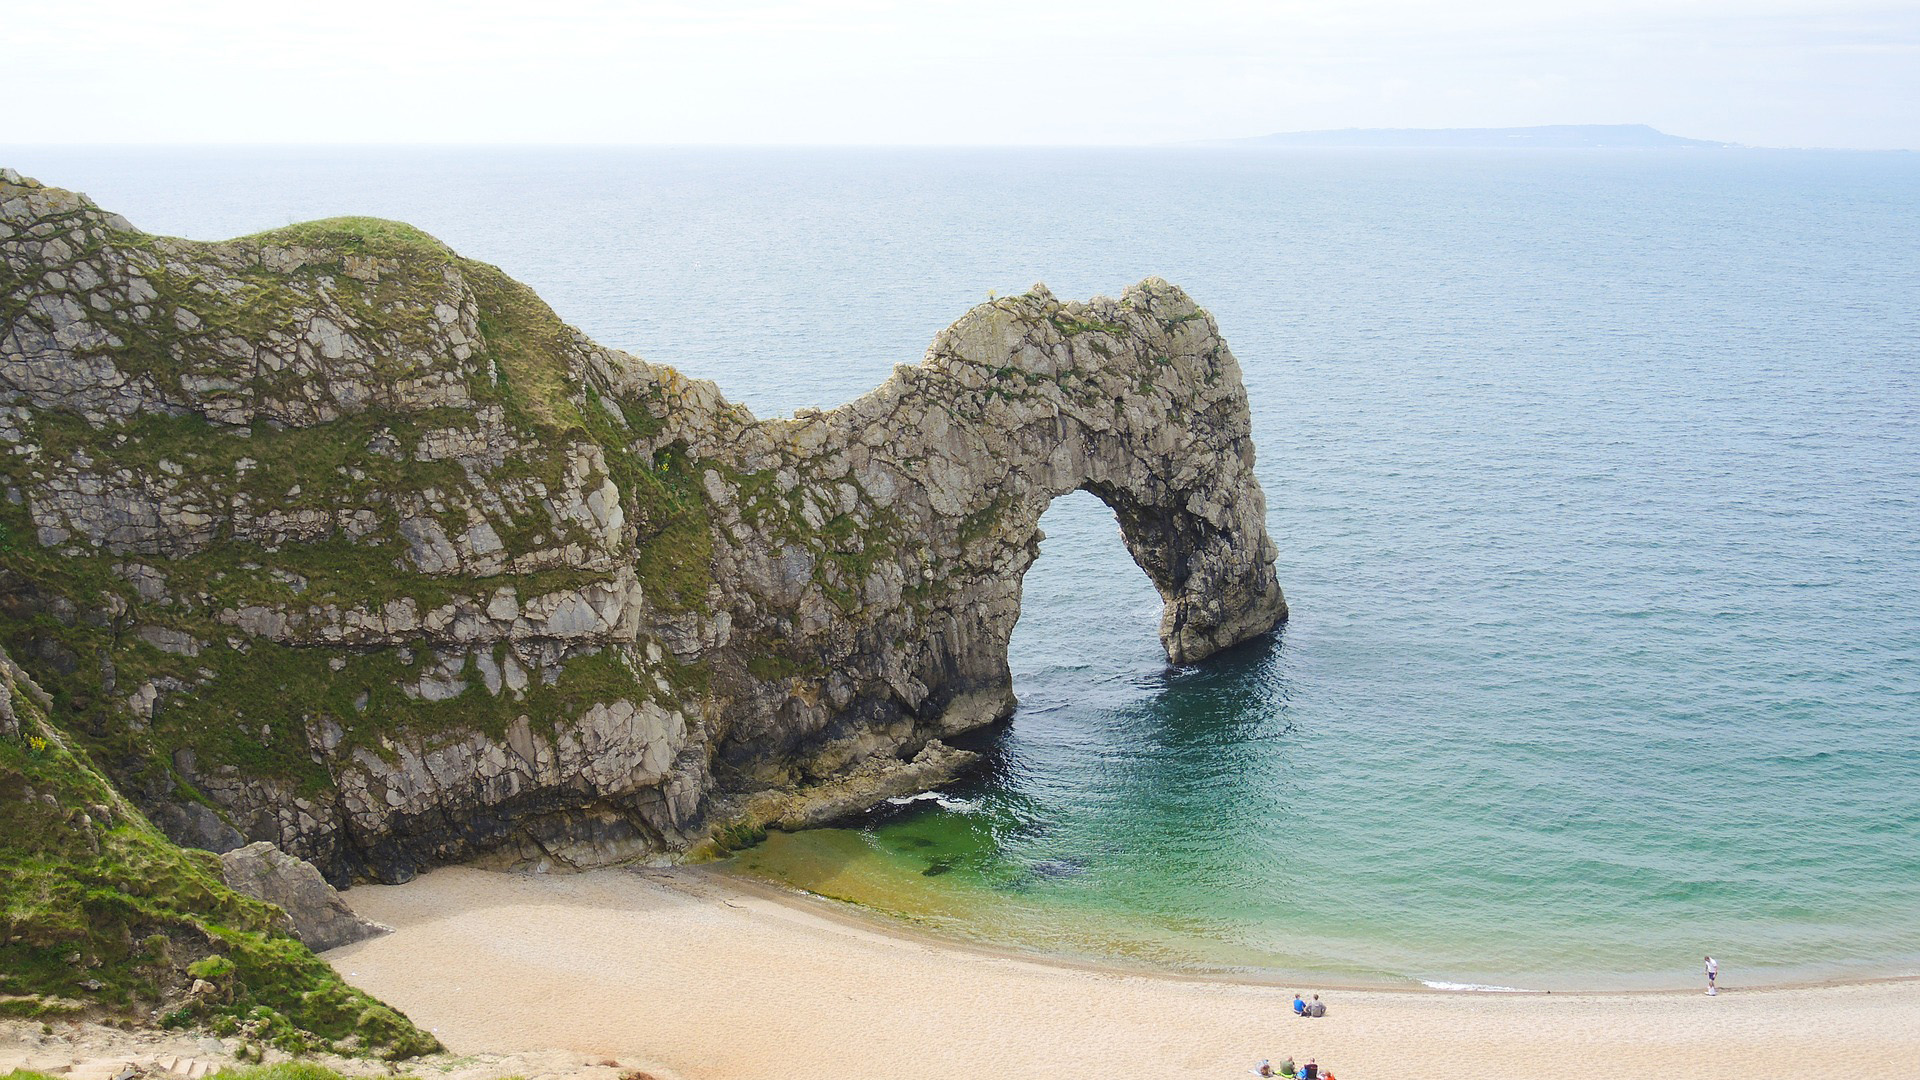 Top Glamping Attractions In Dorset – The Jurassic Coast